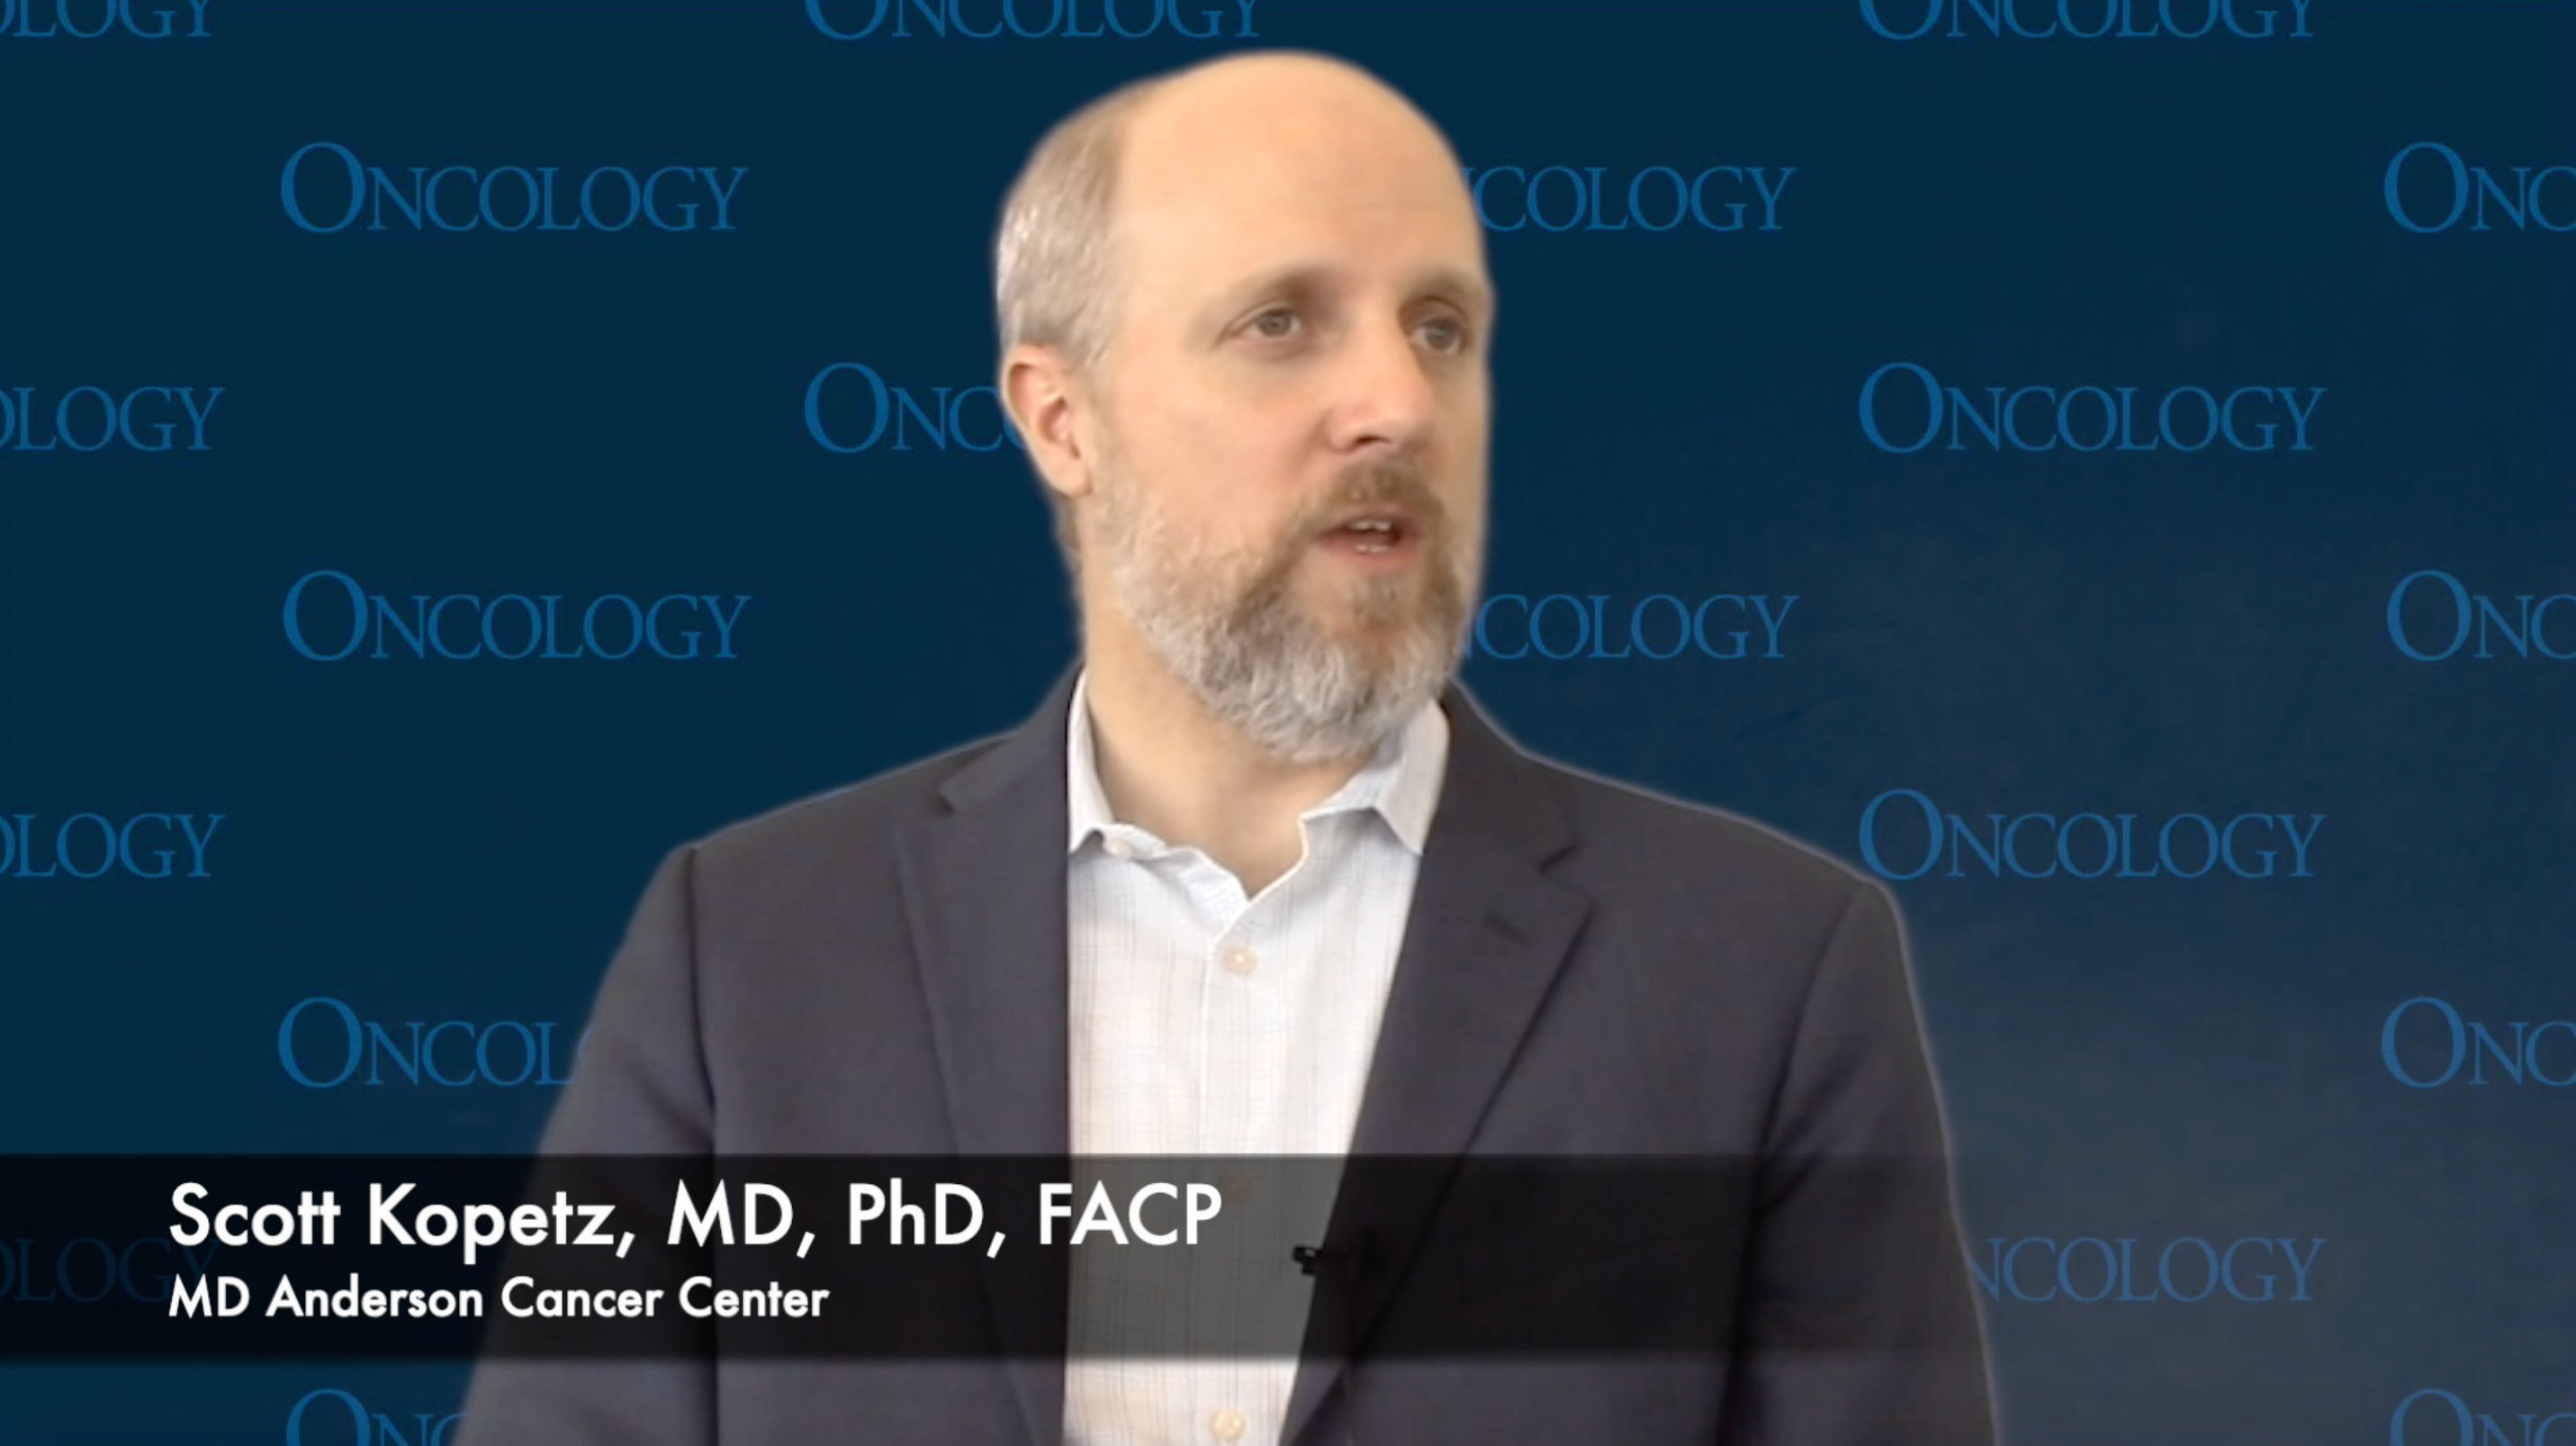 Scott Kopetz, MD, PhD, FACP, Discusses Next Steps for GI Oncology